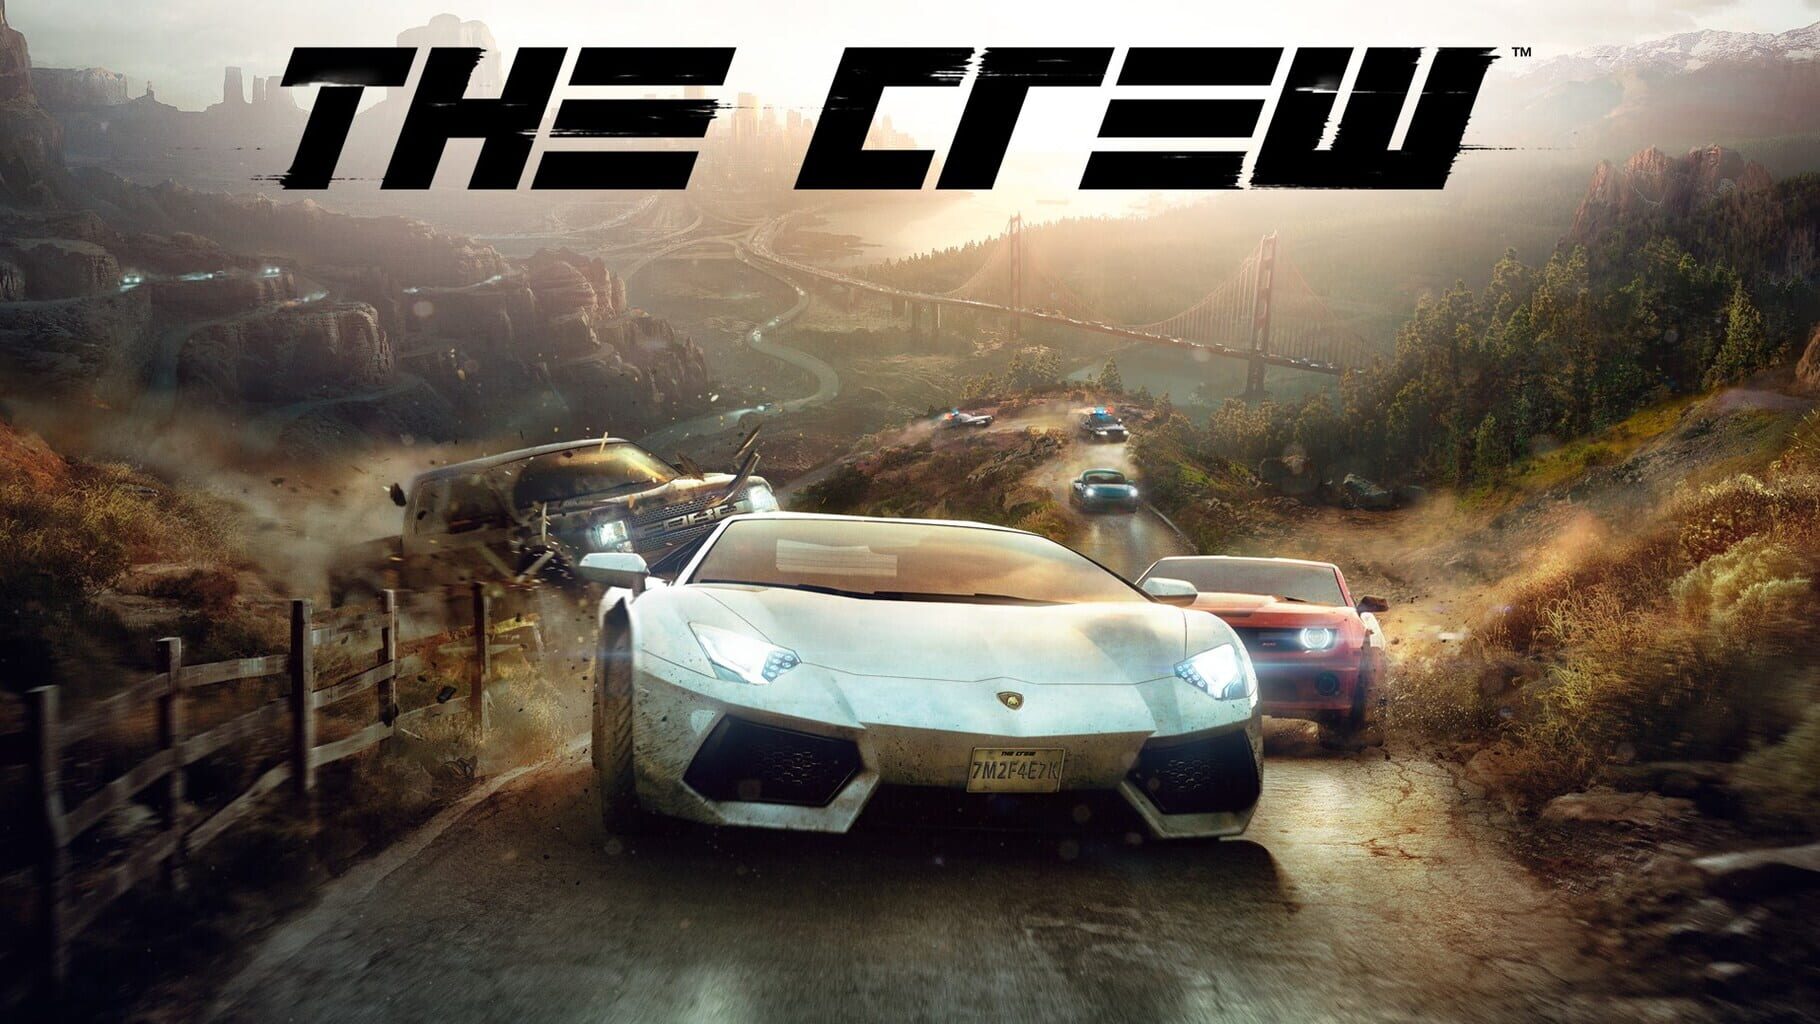 Artwork for The Crew